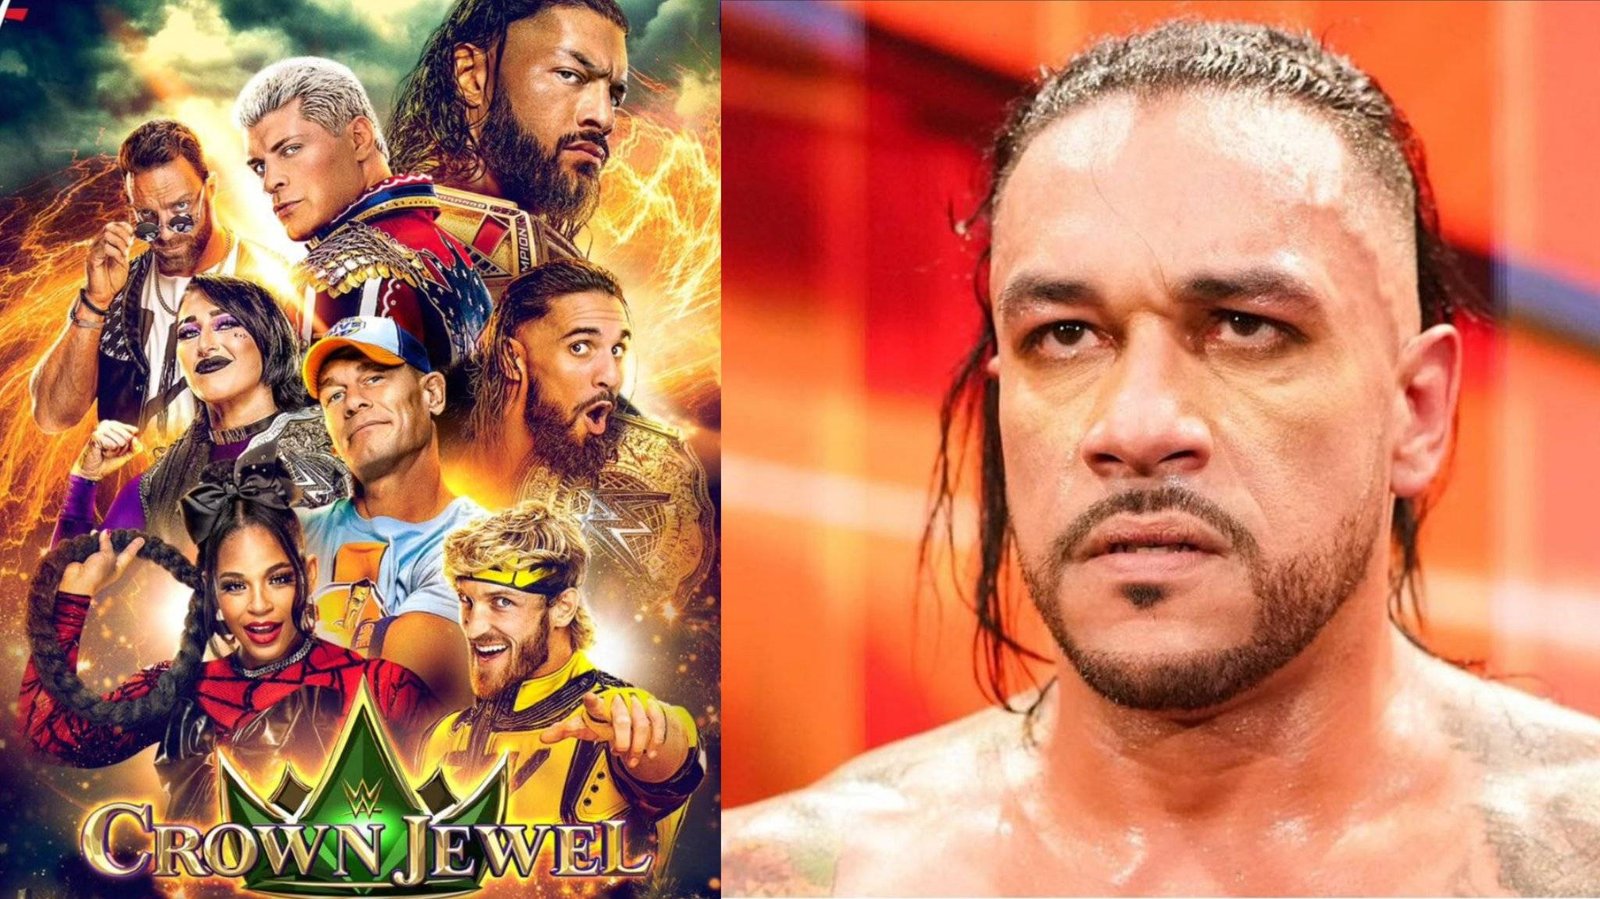 WWE Crown Jewel 2023 Live Streaming How To Watch Crown Jewel For Free?